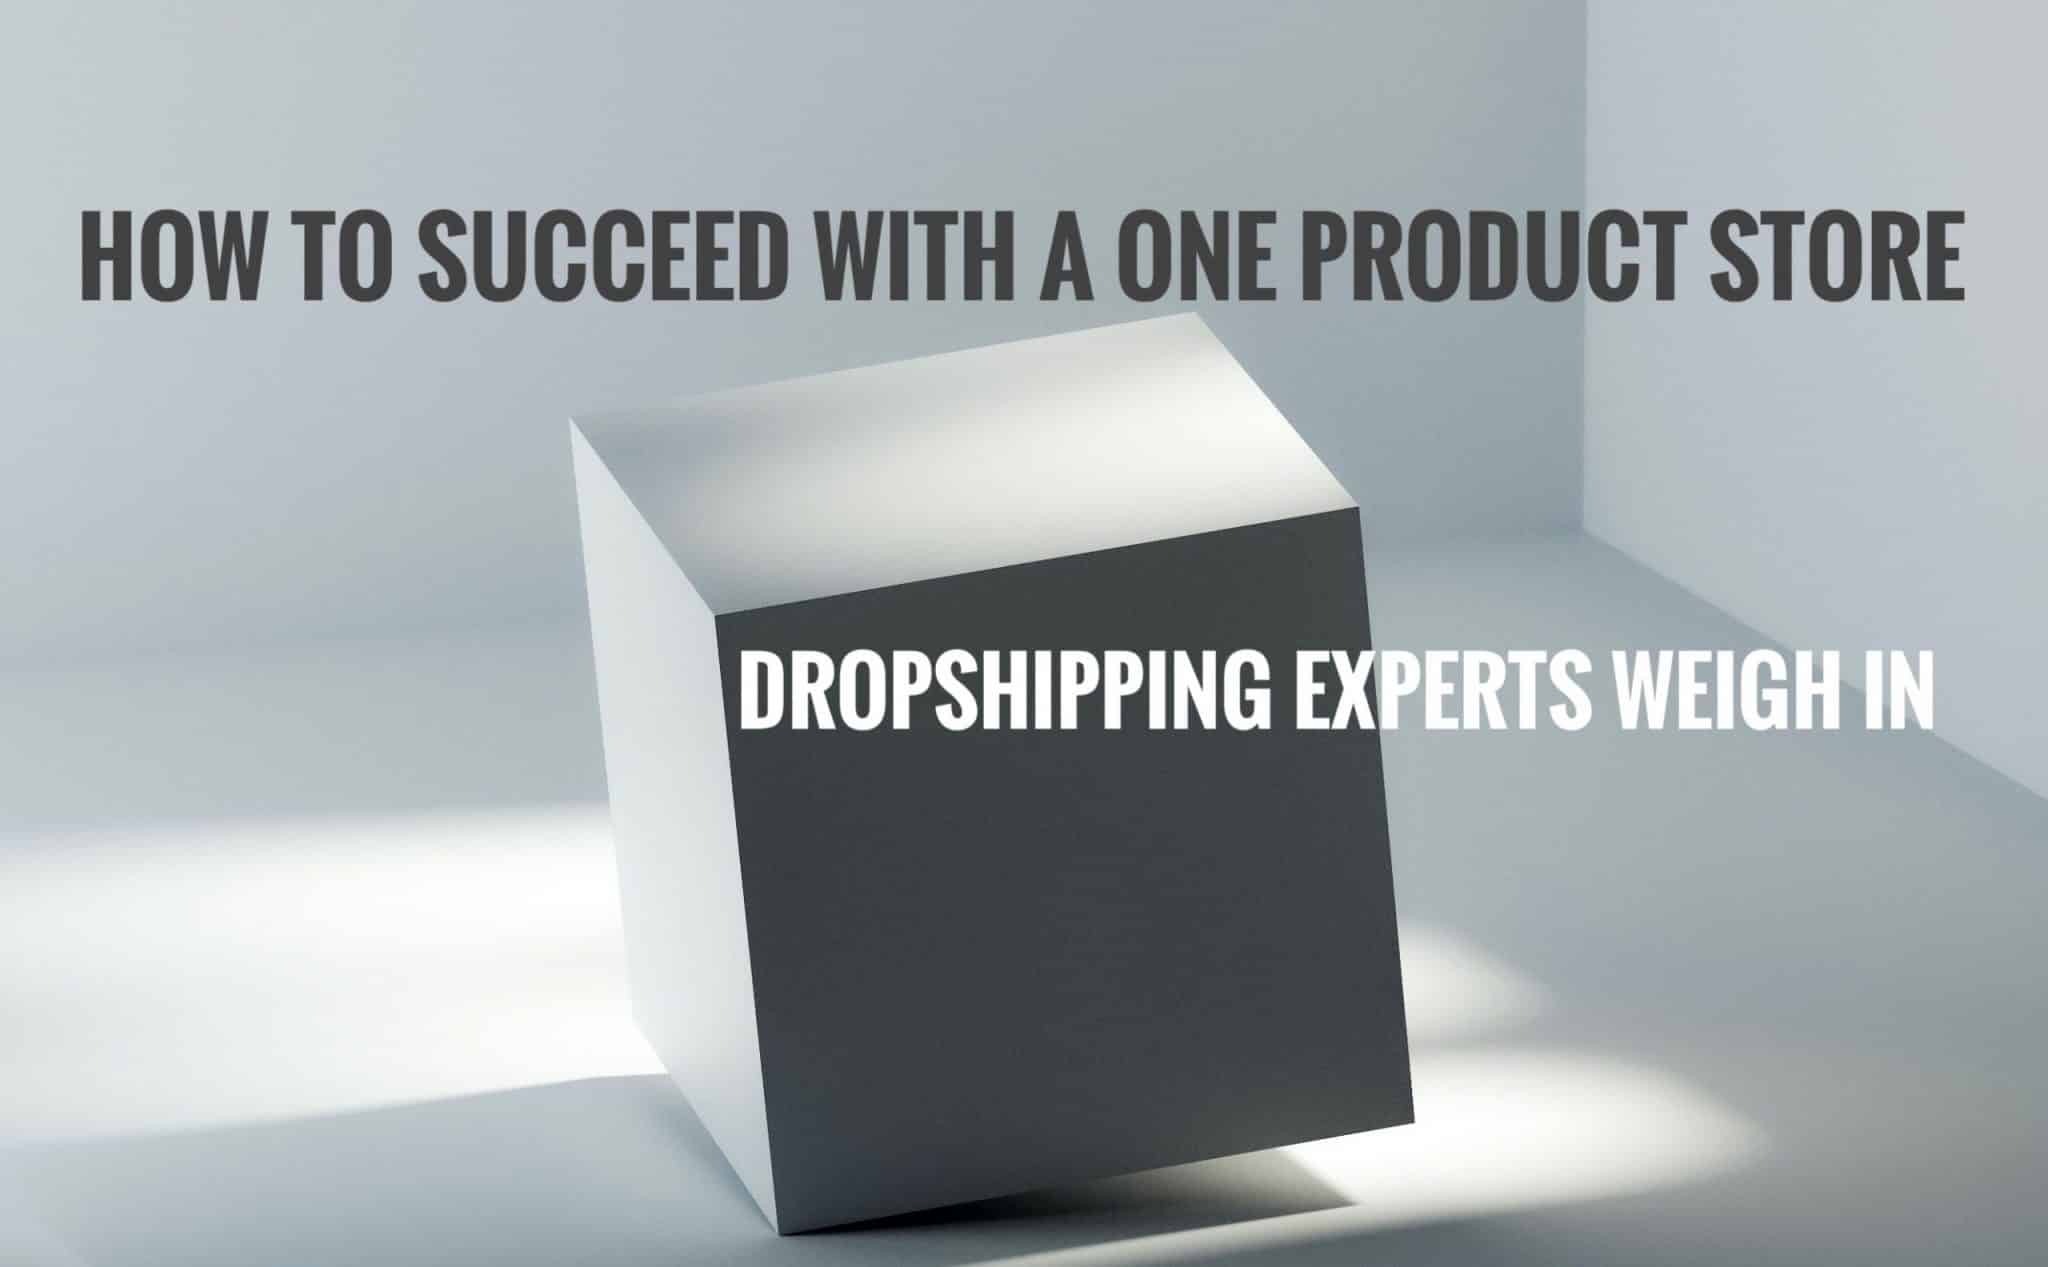 How to Succeed with a One Product Store - Dropshipping Experts Weigh In